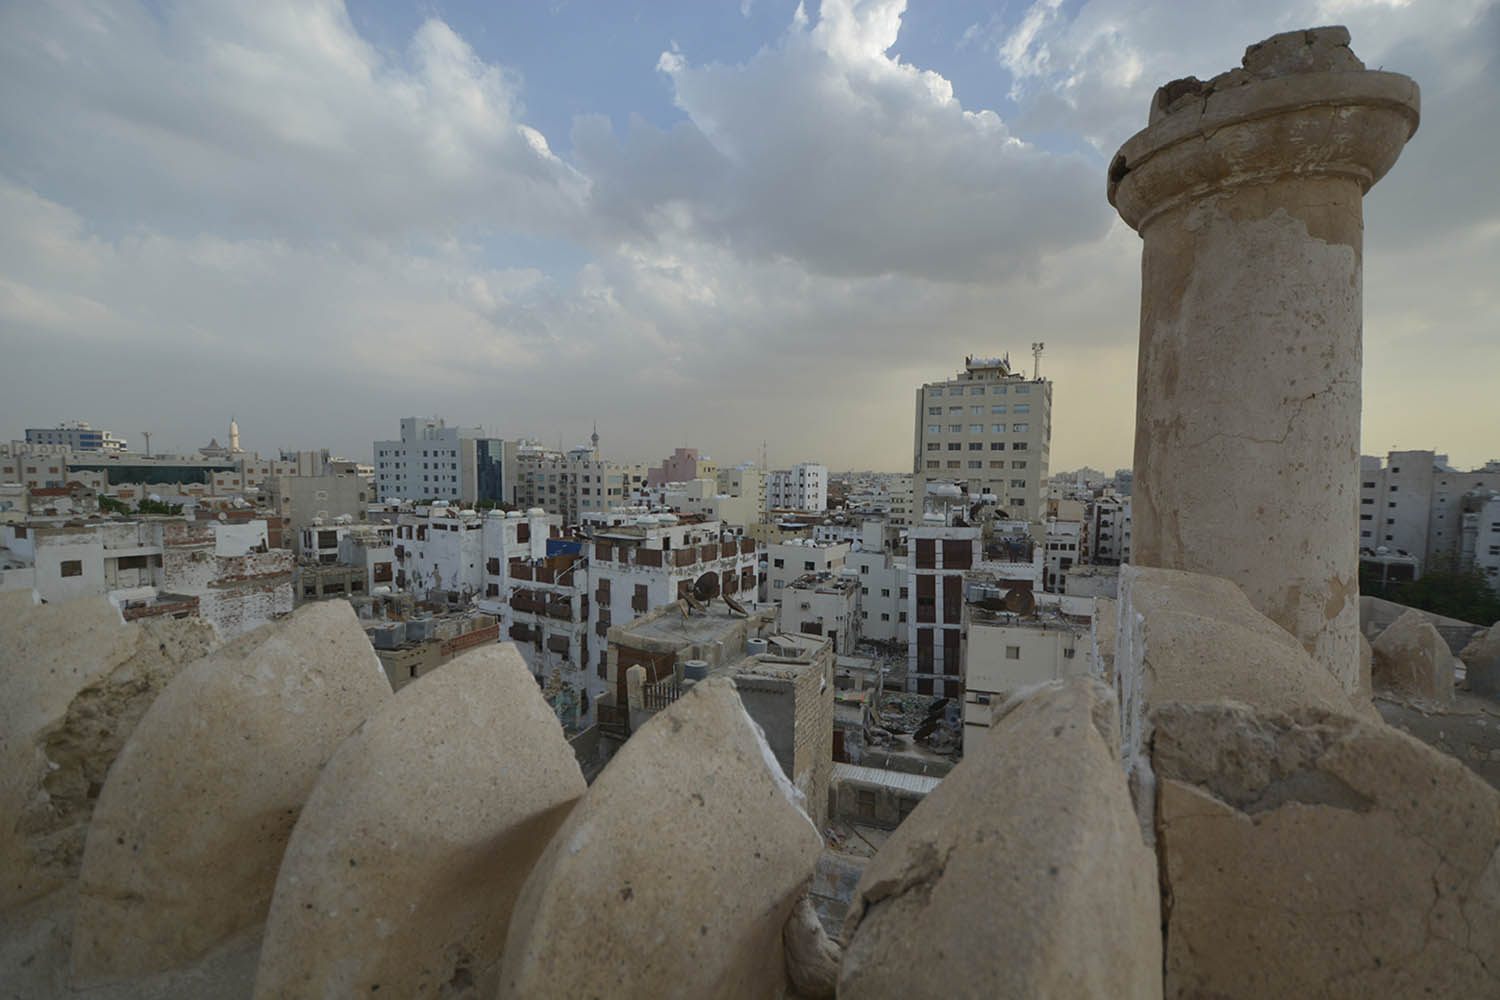 A view of Jiddah from the rooftops of Bayt Naseef